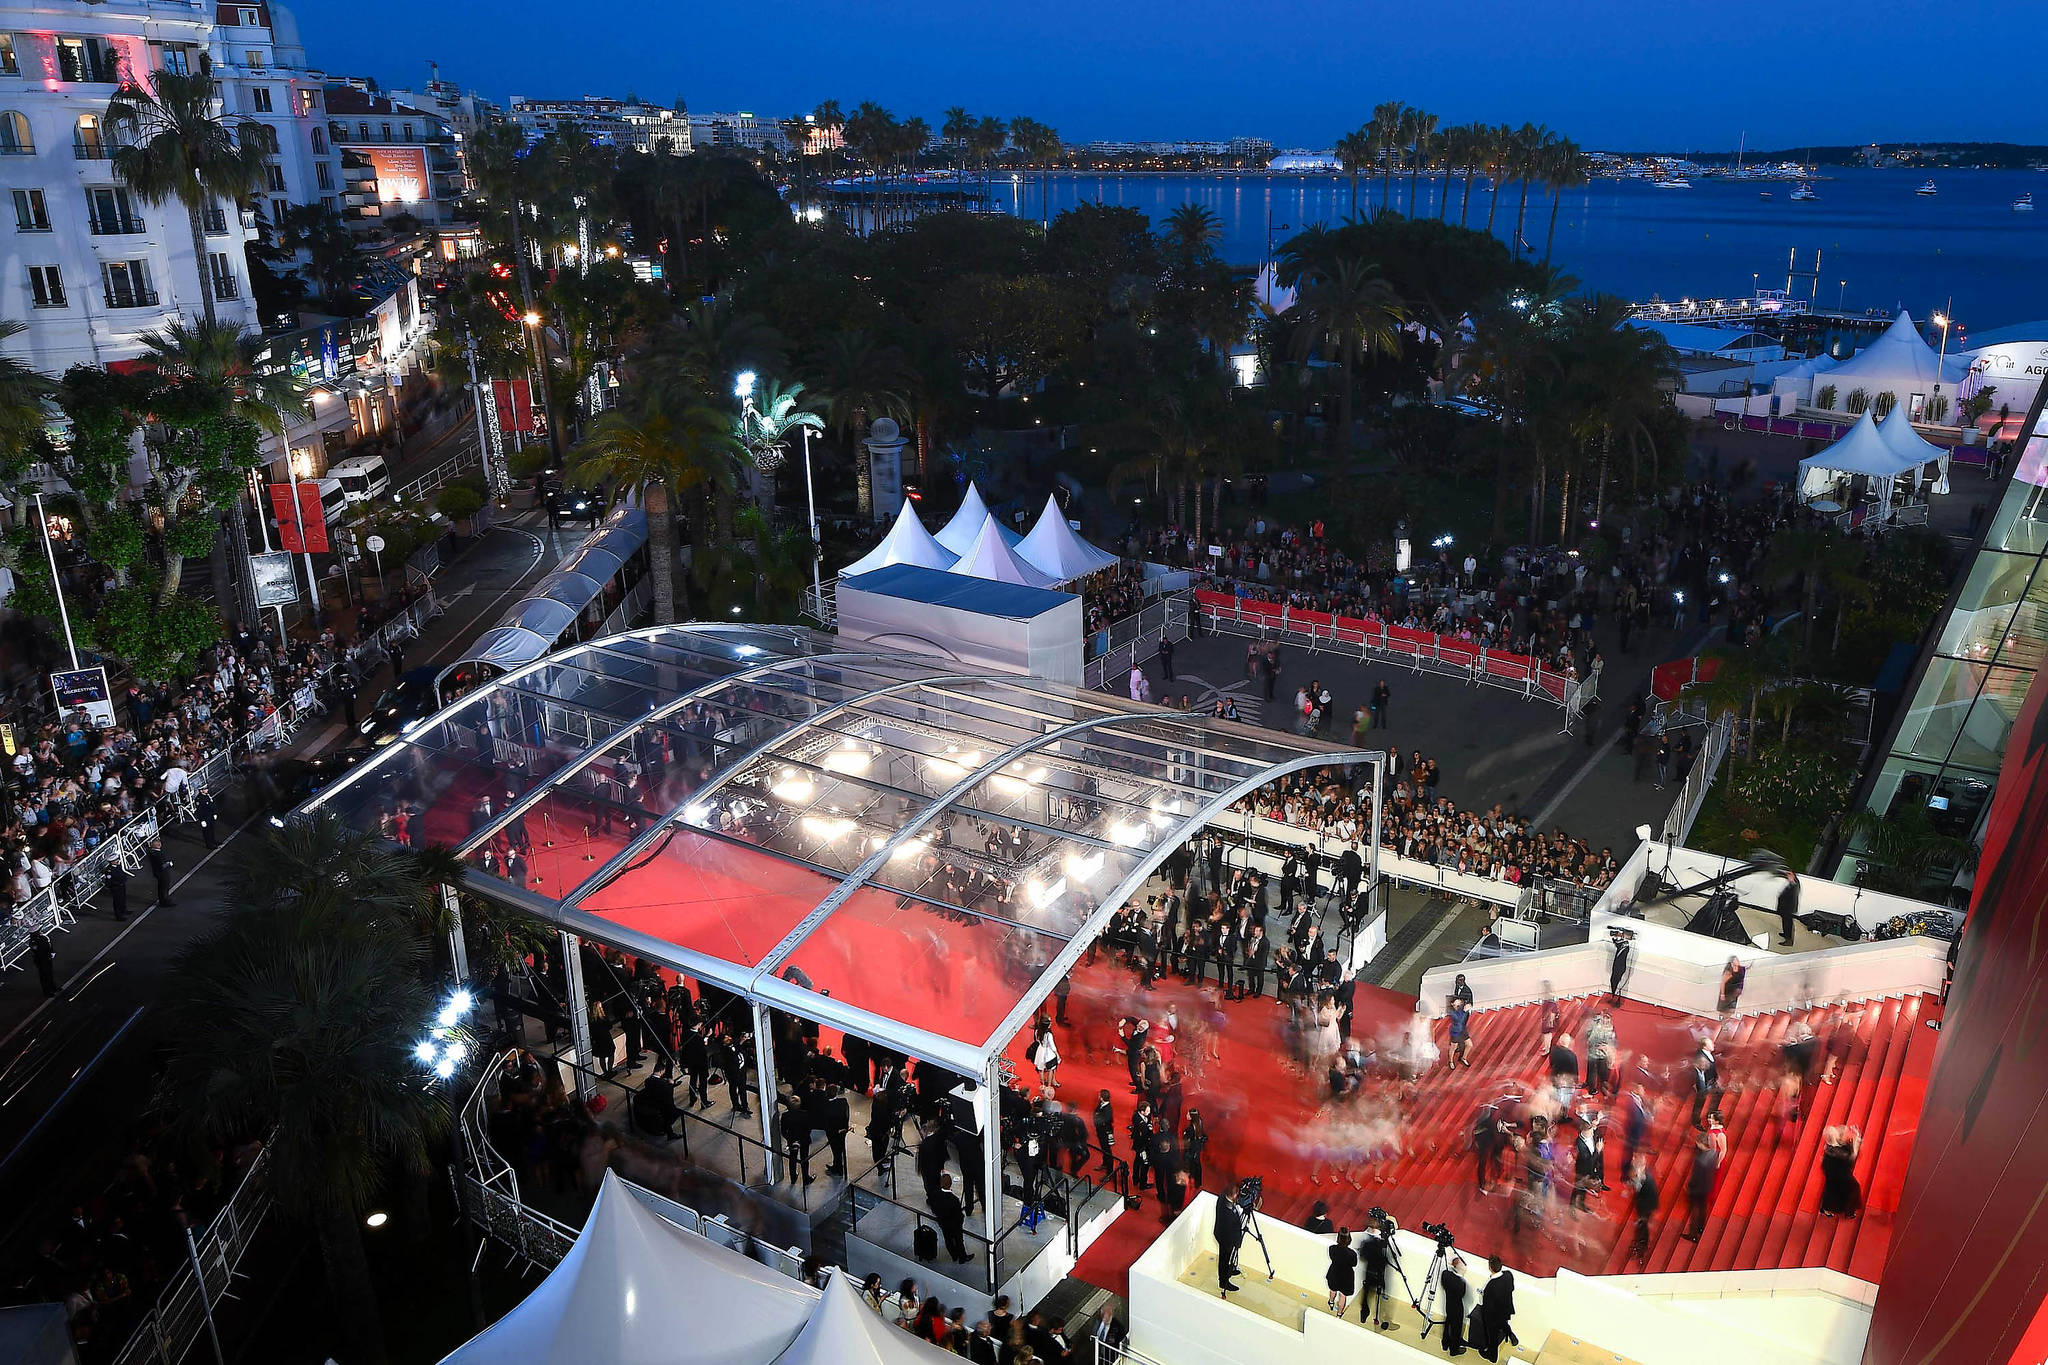 /assets/contentimages/cannes~0.jpg